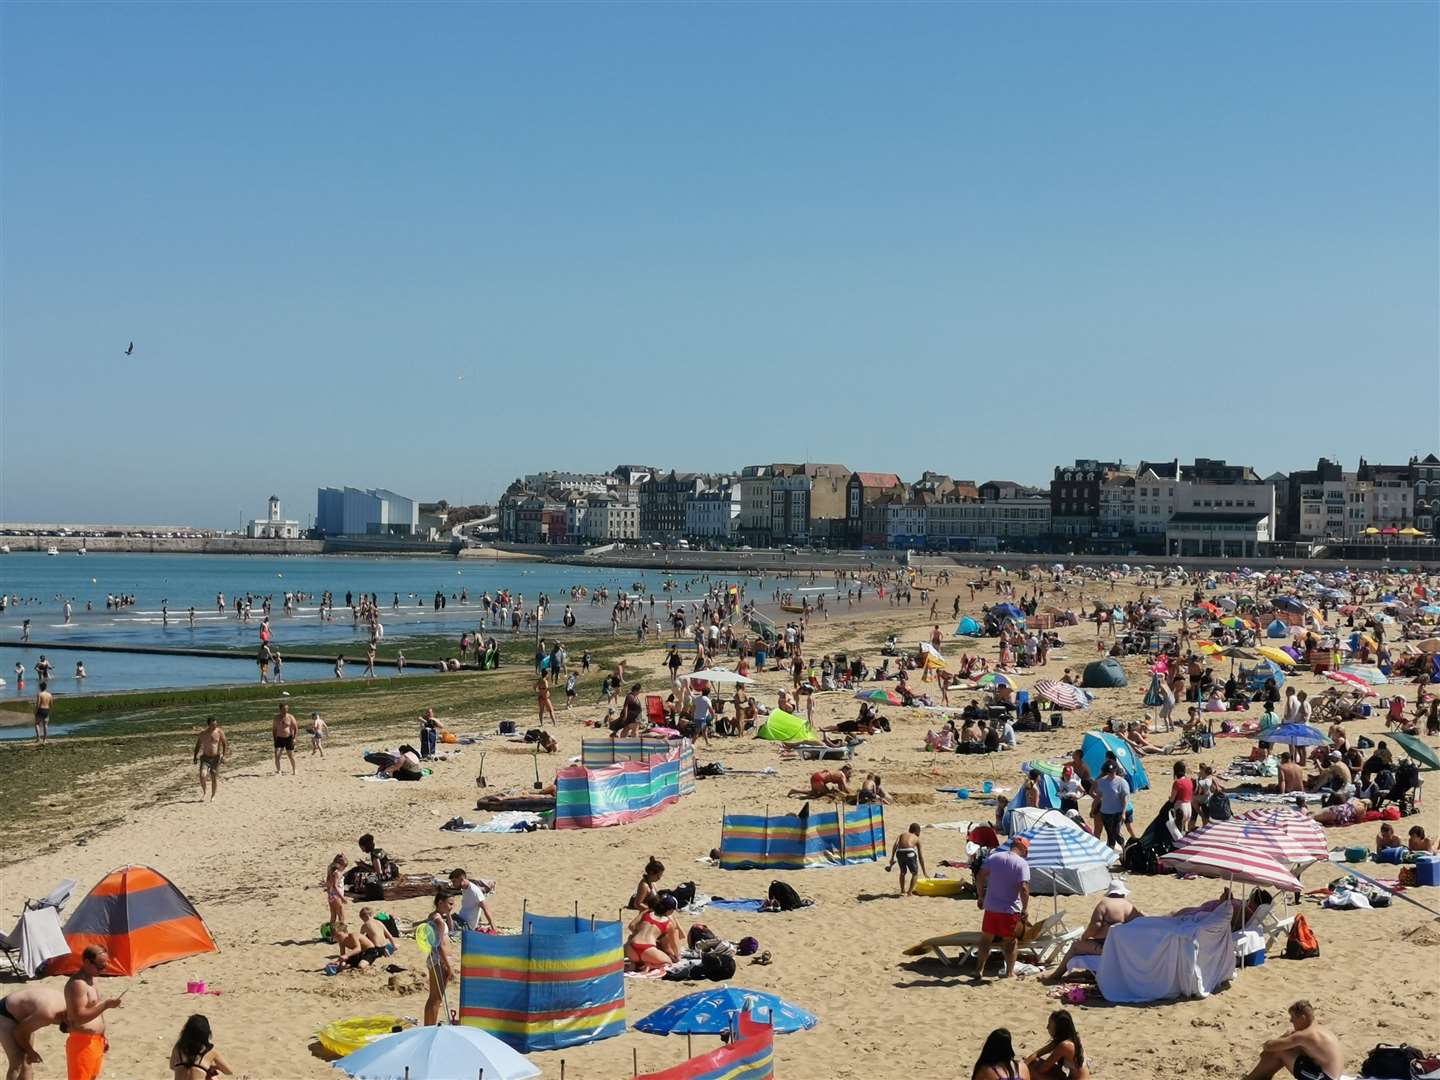 Margate main sands has received a Blue Flag